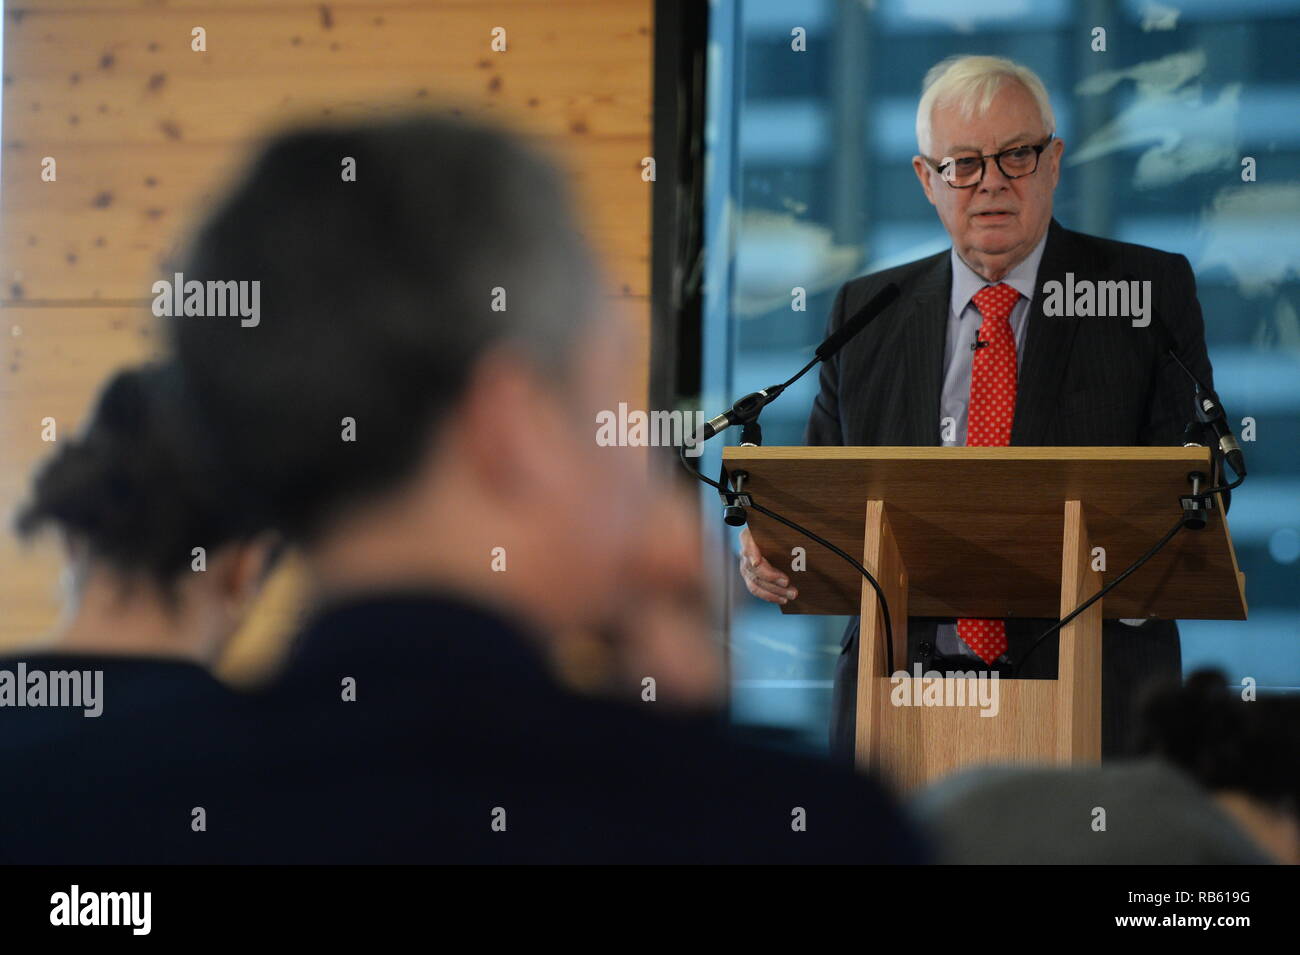 Former Tory minister and Hong Kong governor Lord Patten speaking during a People's Vote event at Coin Street Neighbourhood Centre, central London. Stock Photo